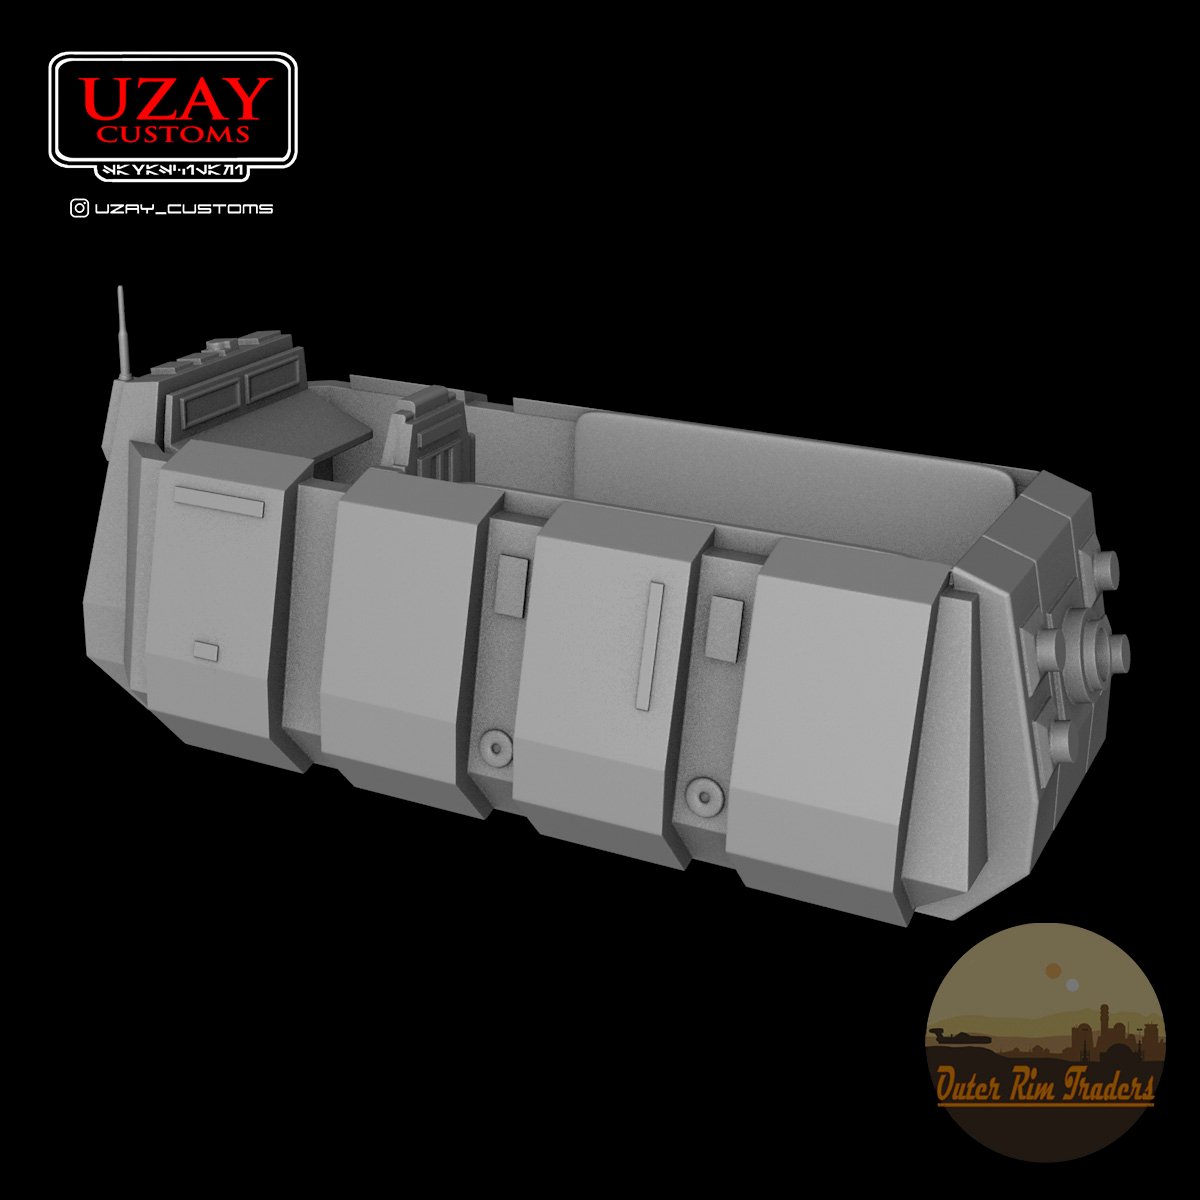 Image of Hoth Transport modeled by Uzay Customs